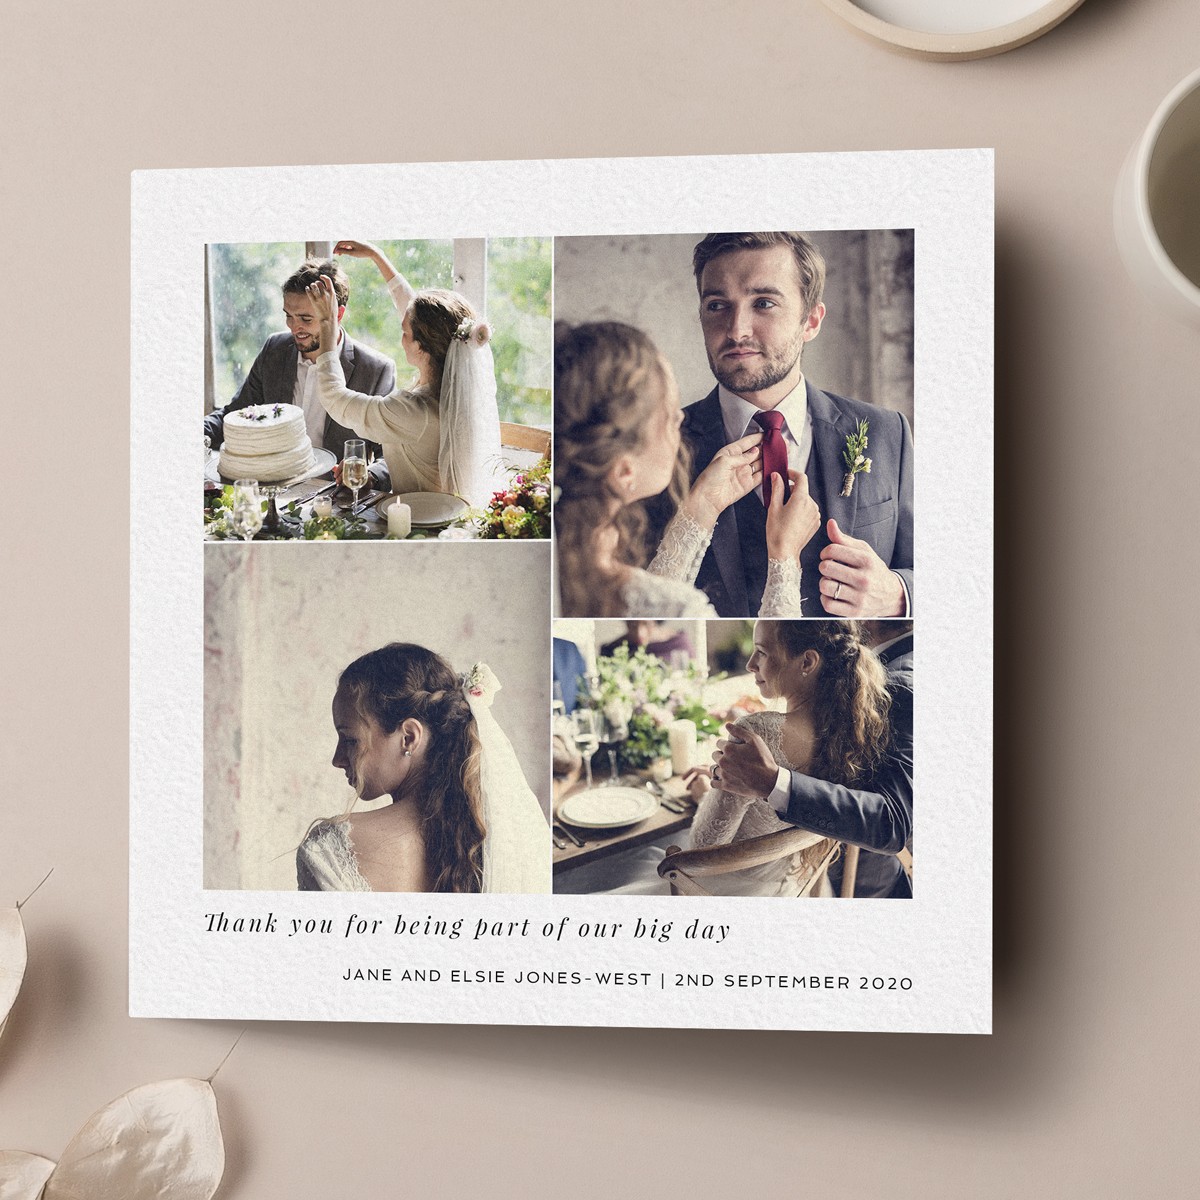 Square folded premium wedding thank you card with 4 full color photos